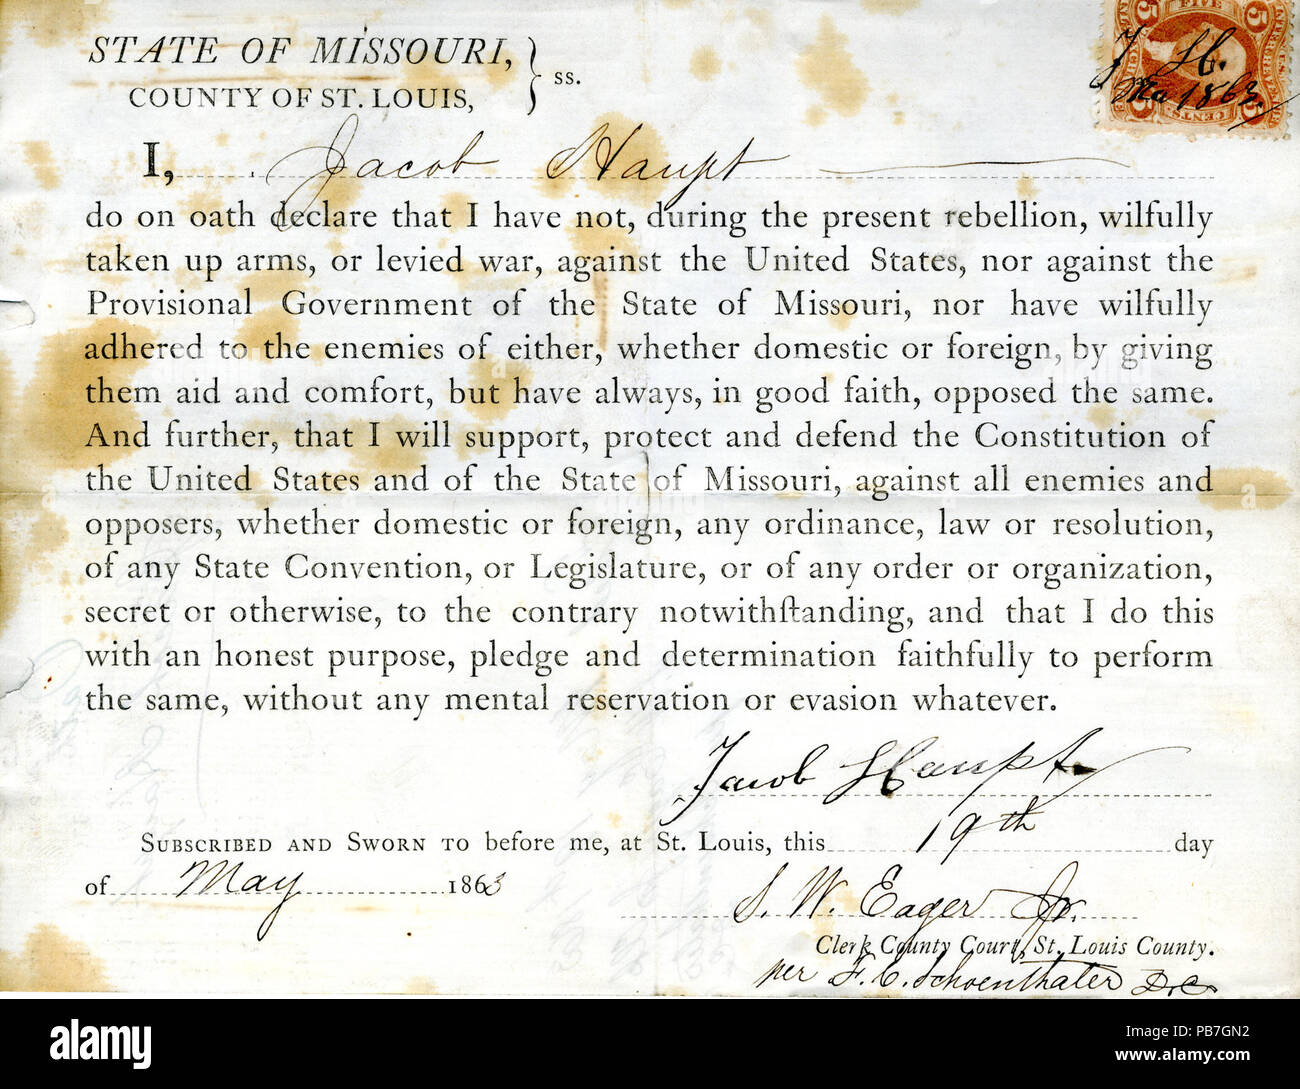 949 Loyalty oath of Jacob Haupt of Missouri, County of St. Louis Stock Photo